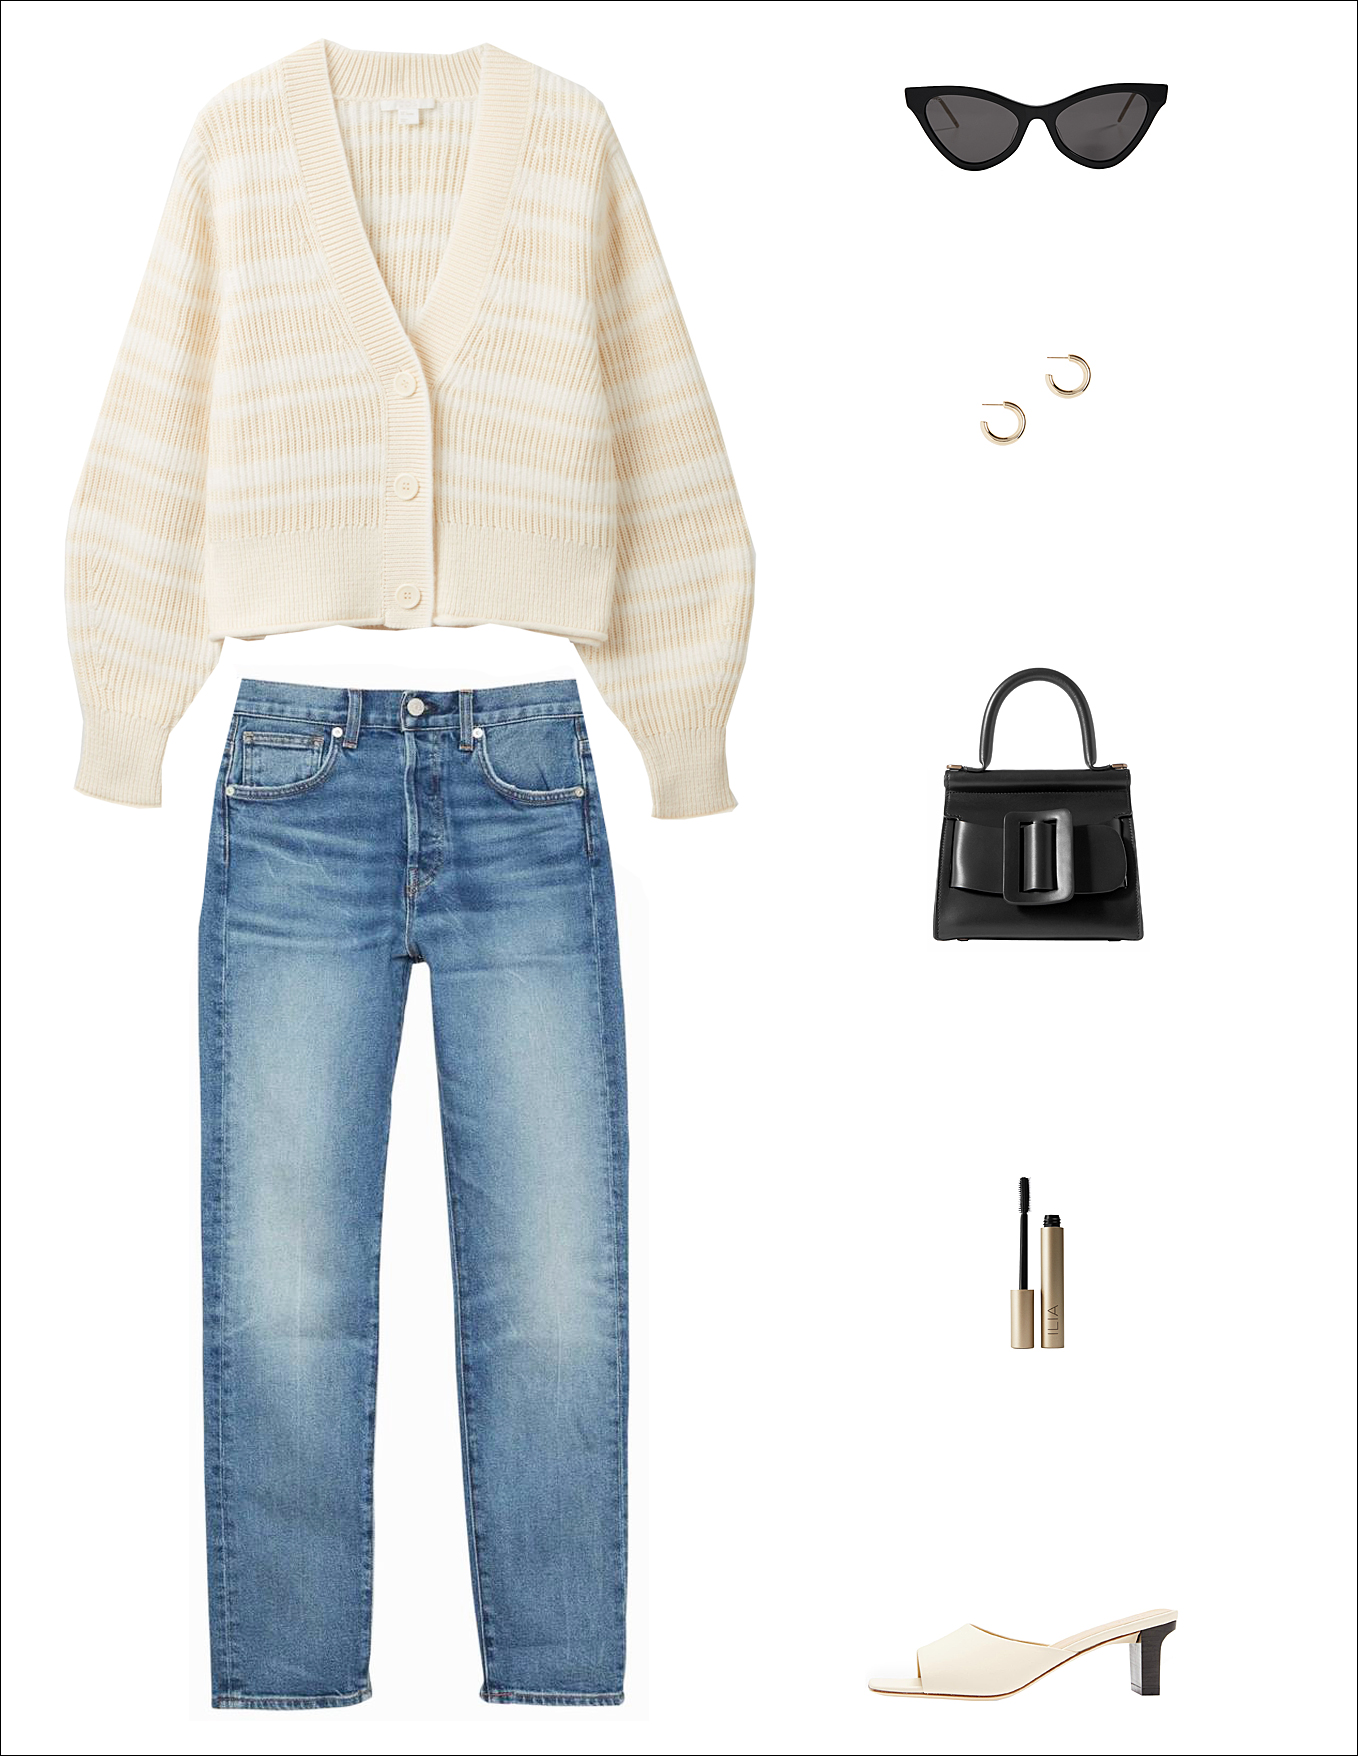 A Chic Way to Wear a Cozy Cardigan for Spring